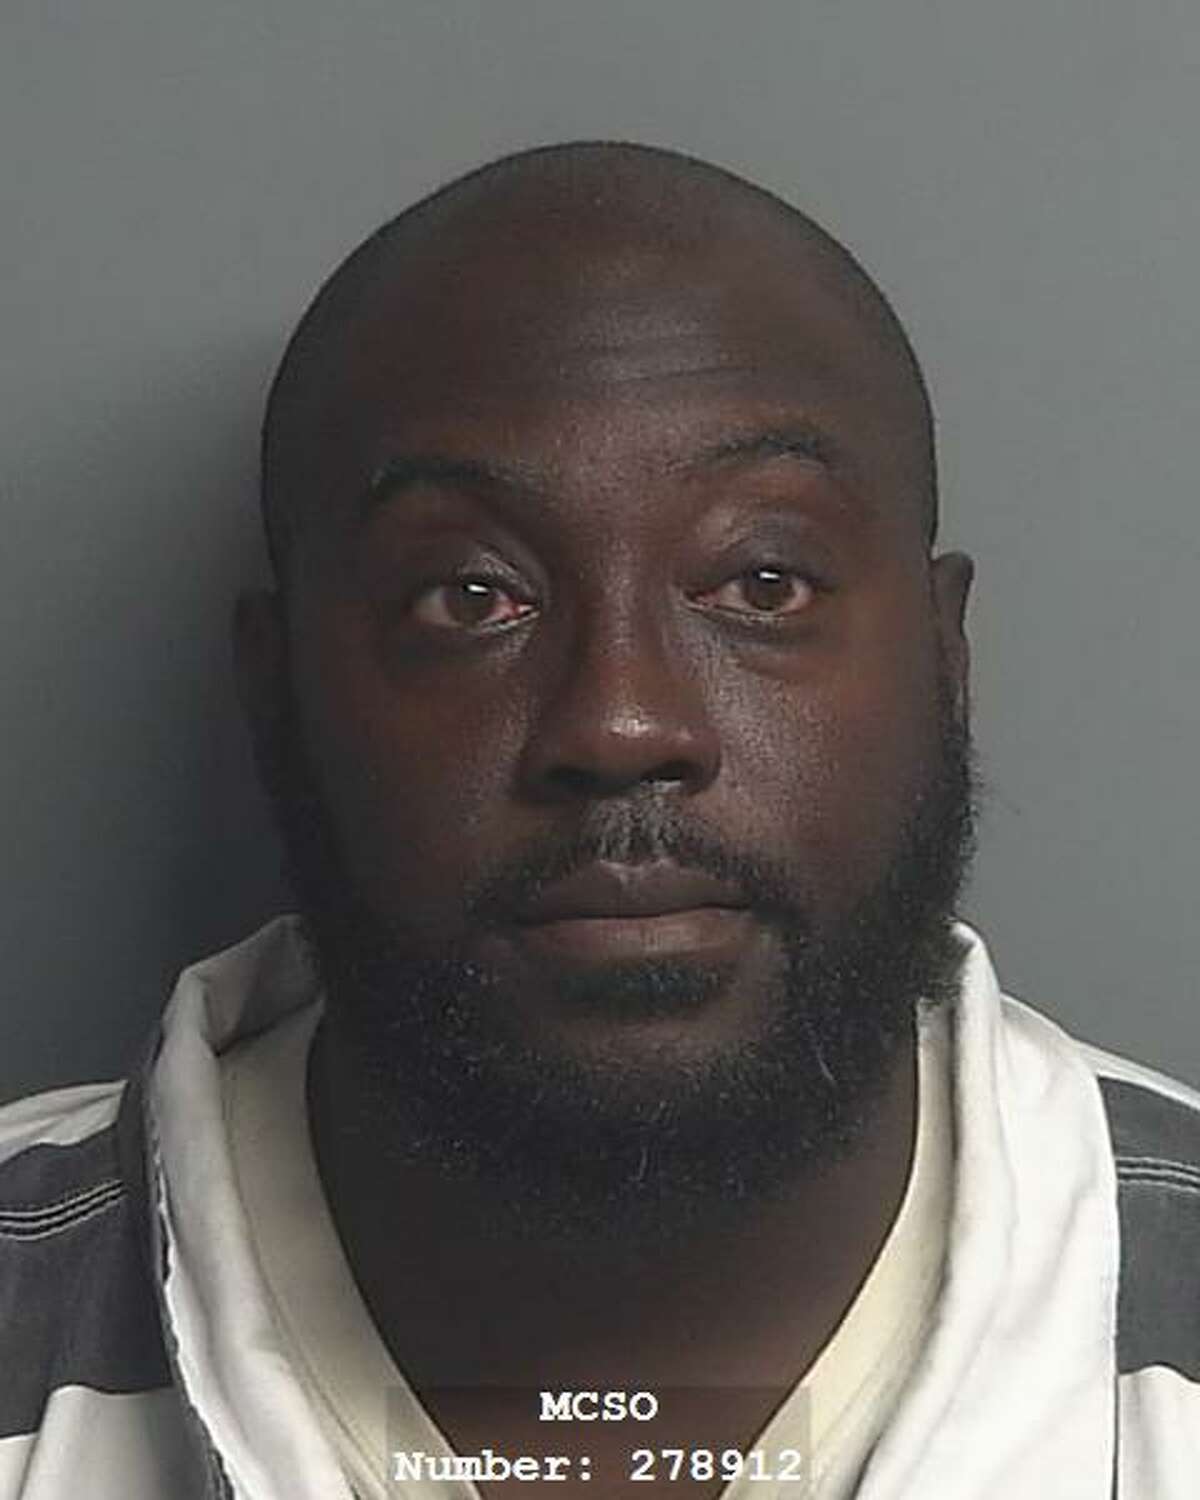 Derek Devone Cobbs, 42, was convicted by a Montgomery County jury on Nov. 17 for the first-degree felony offense of continuous abuse of a child in presiding Patty Maginnis’ 435th District Court. Jurors sentenced Cobbs to life the following day, according to the District Attorney’s Office.